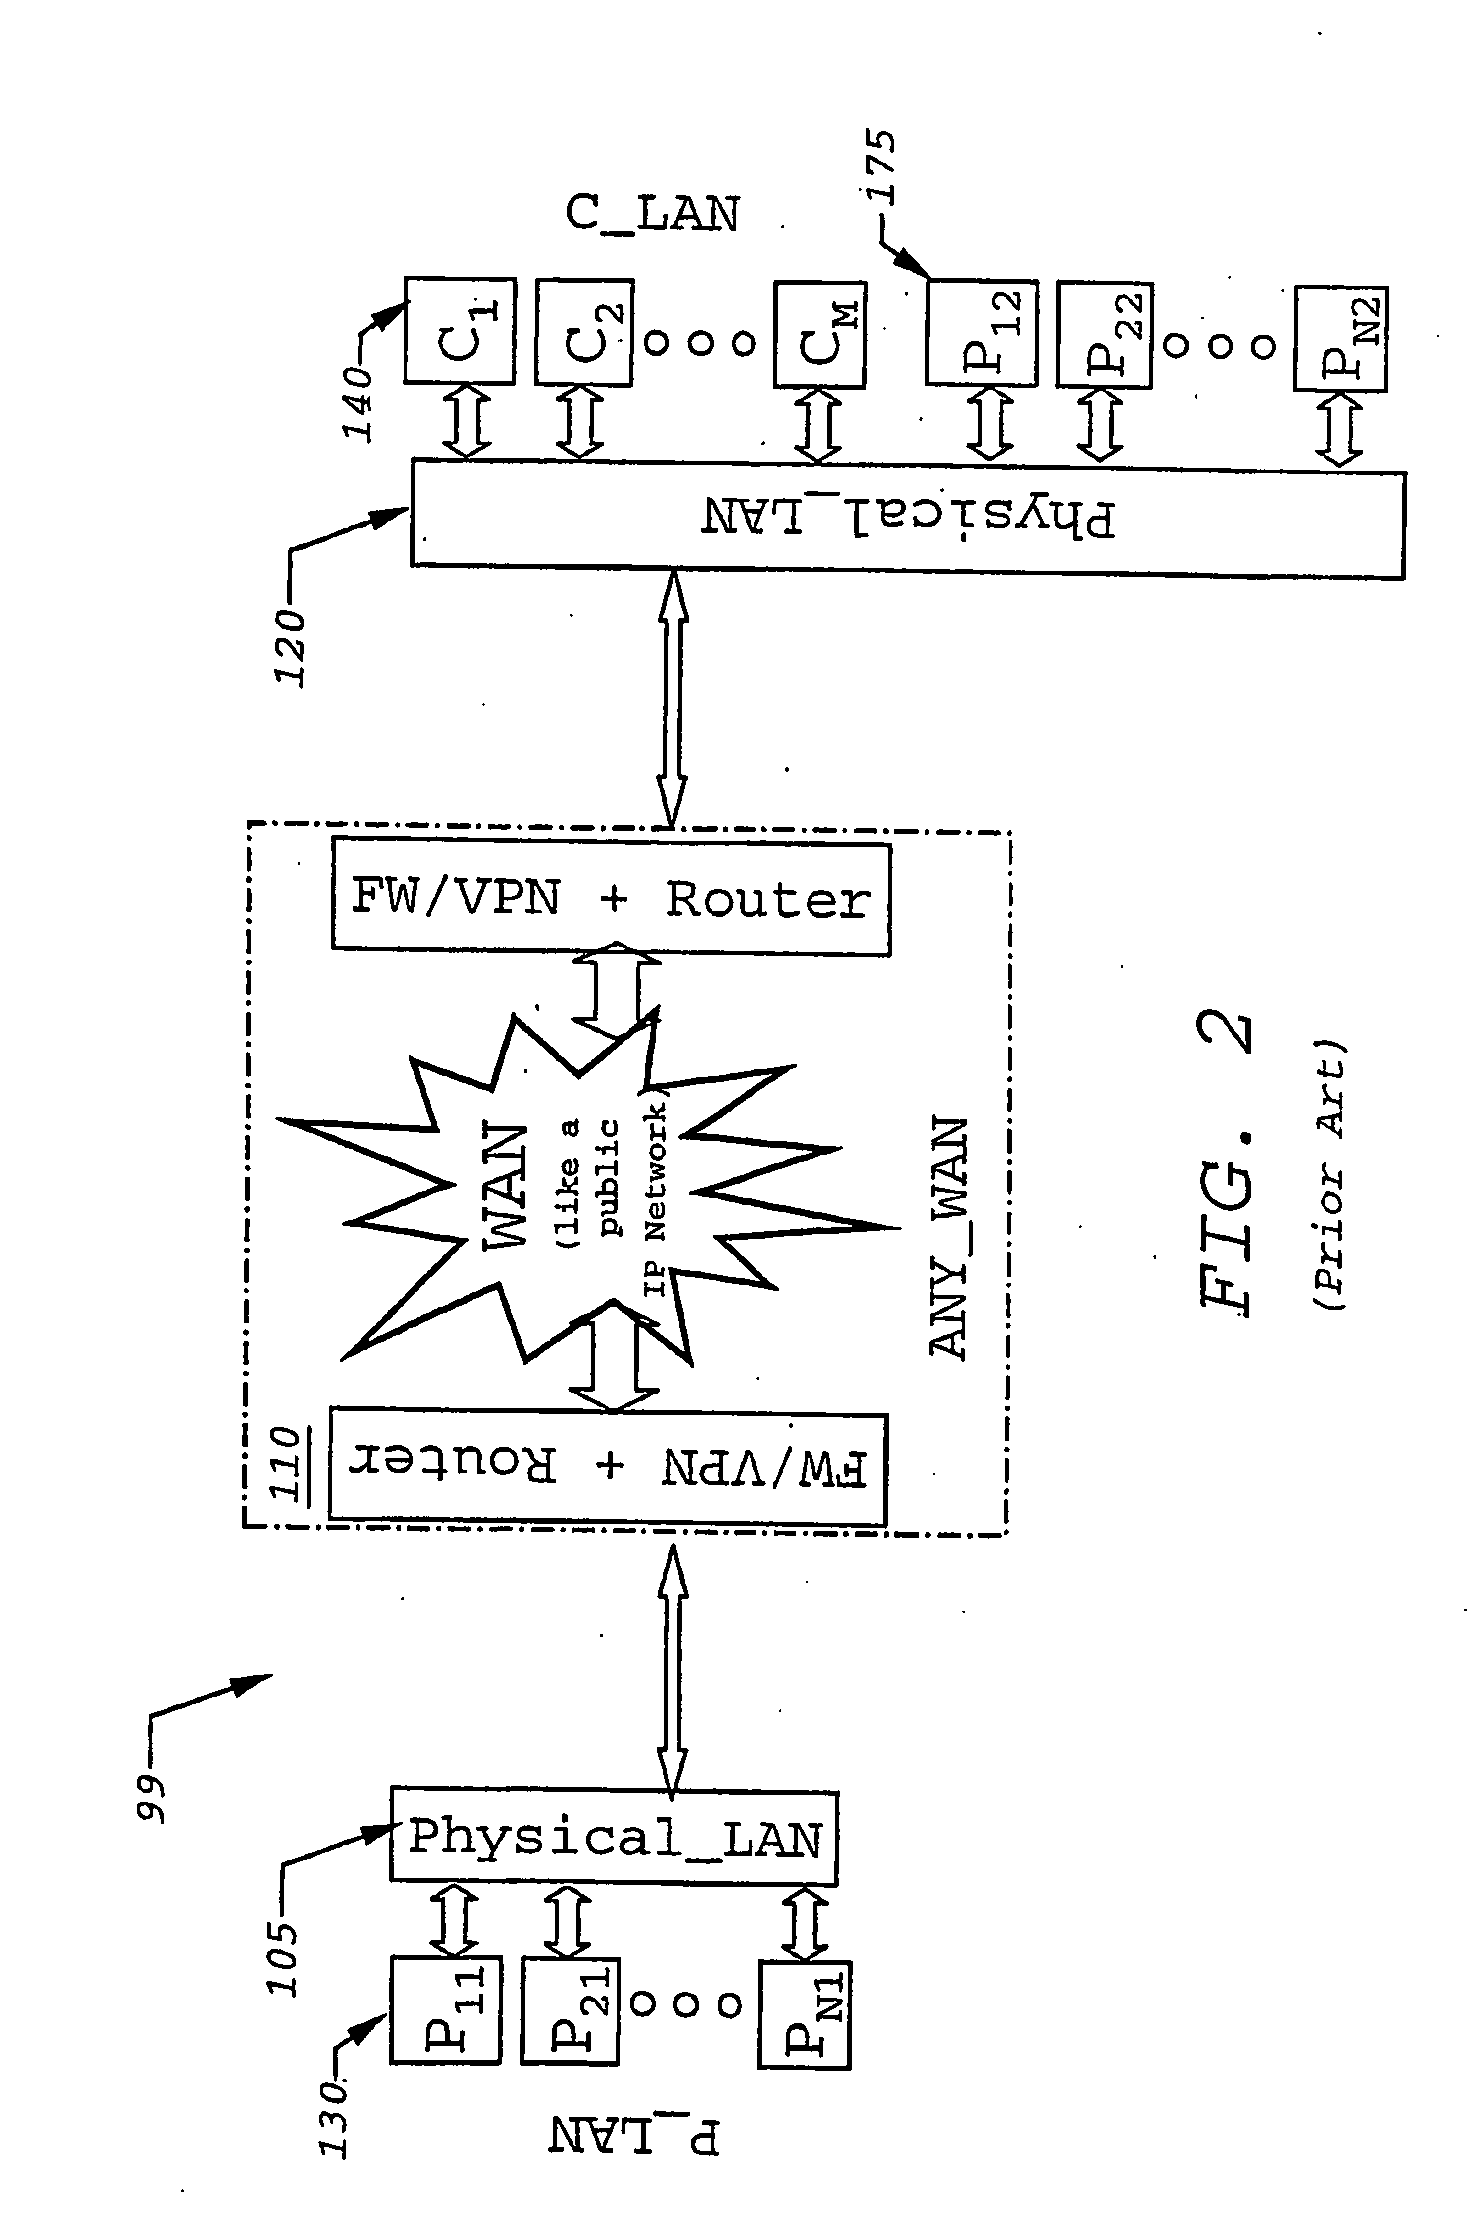 Apparatus and method for optimized and secured reflection of network services to remote locations